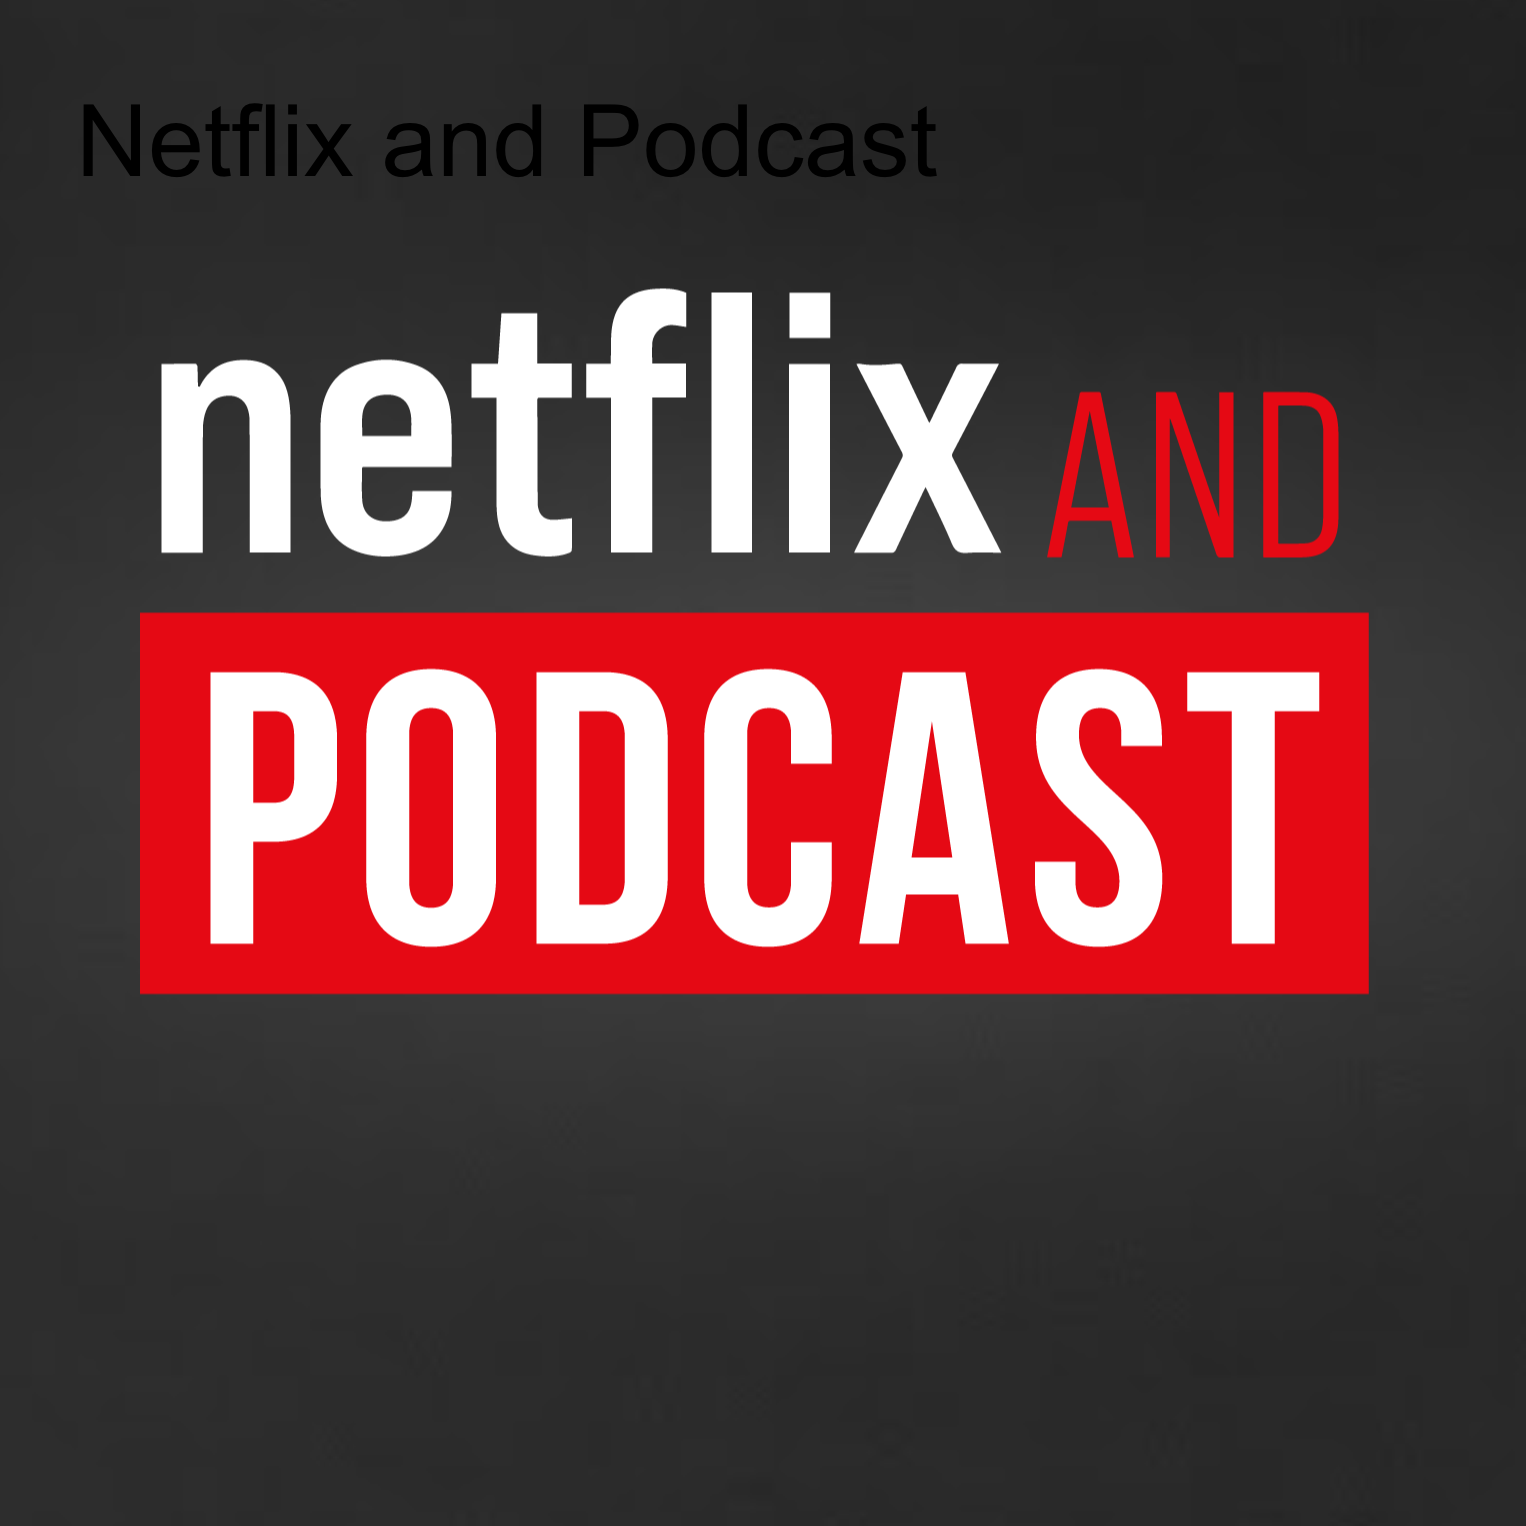 Netflix and Podcast